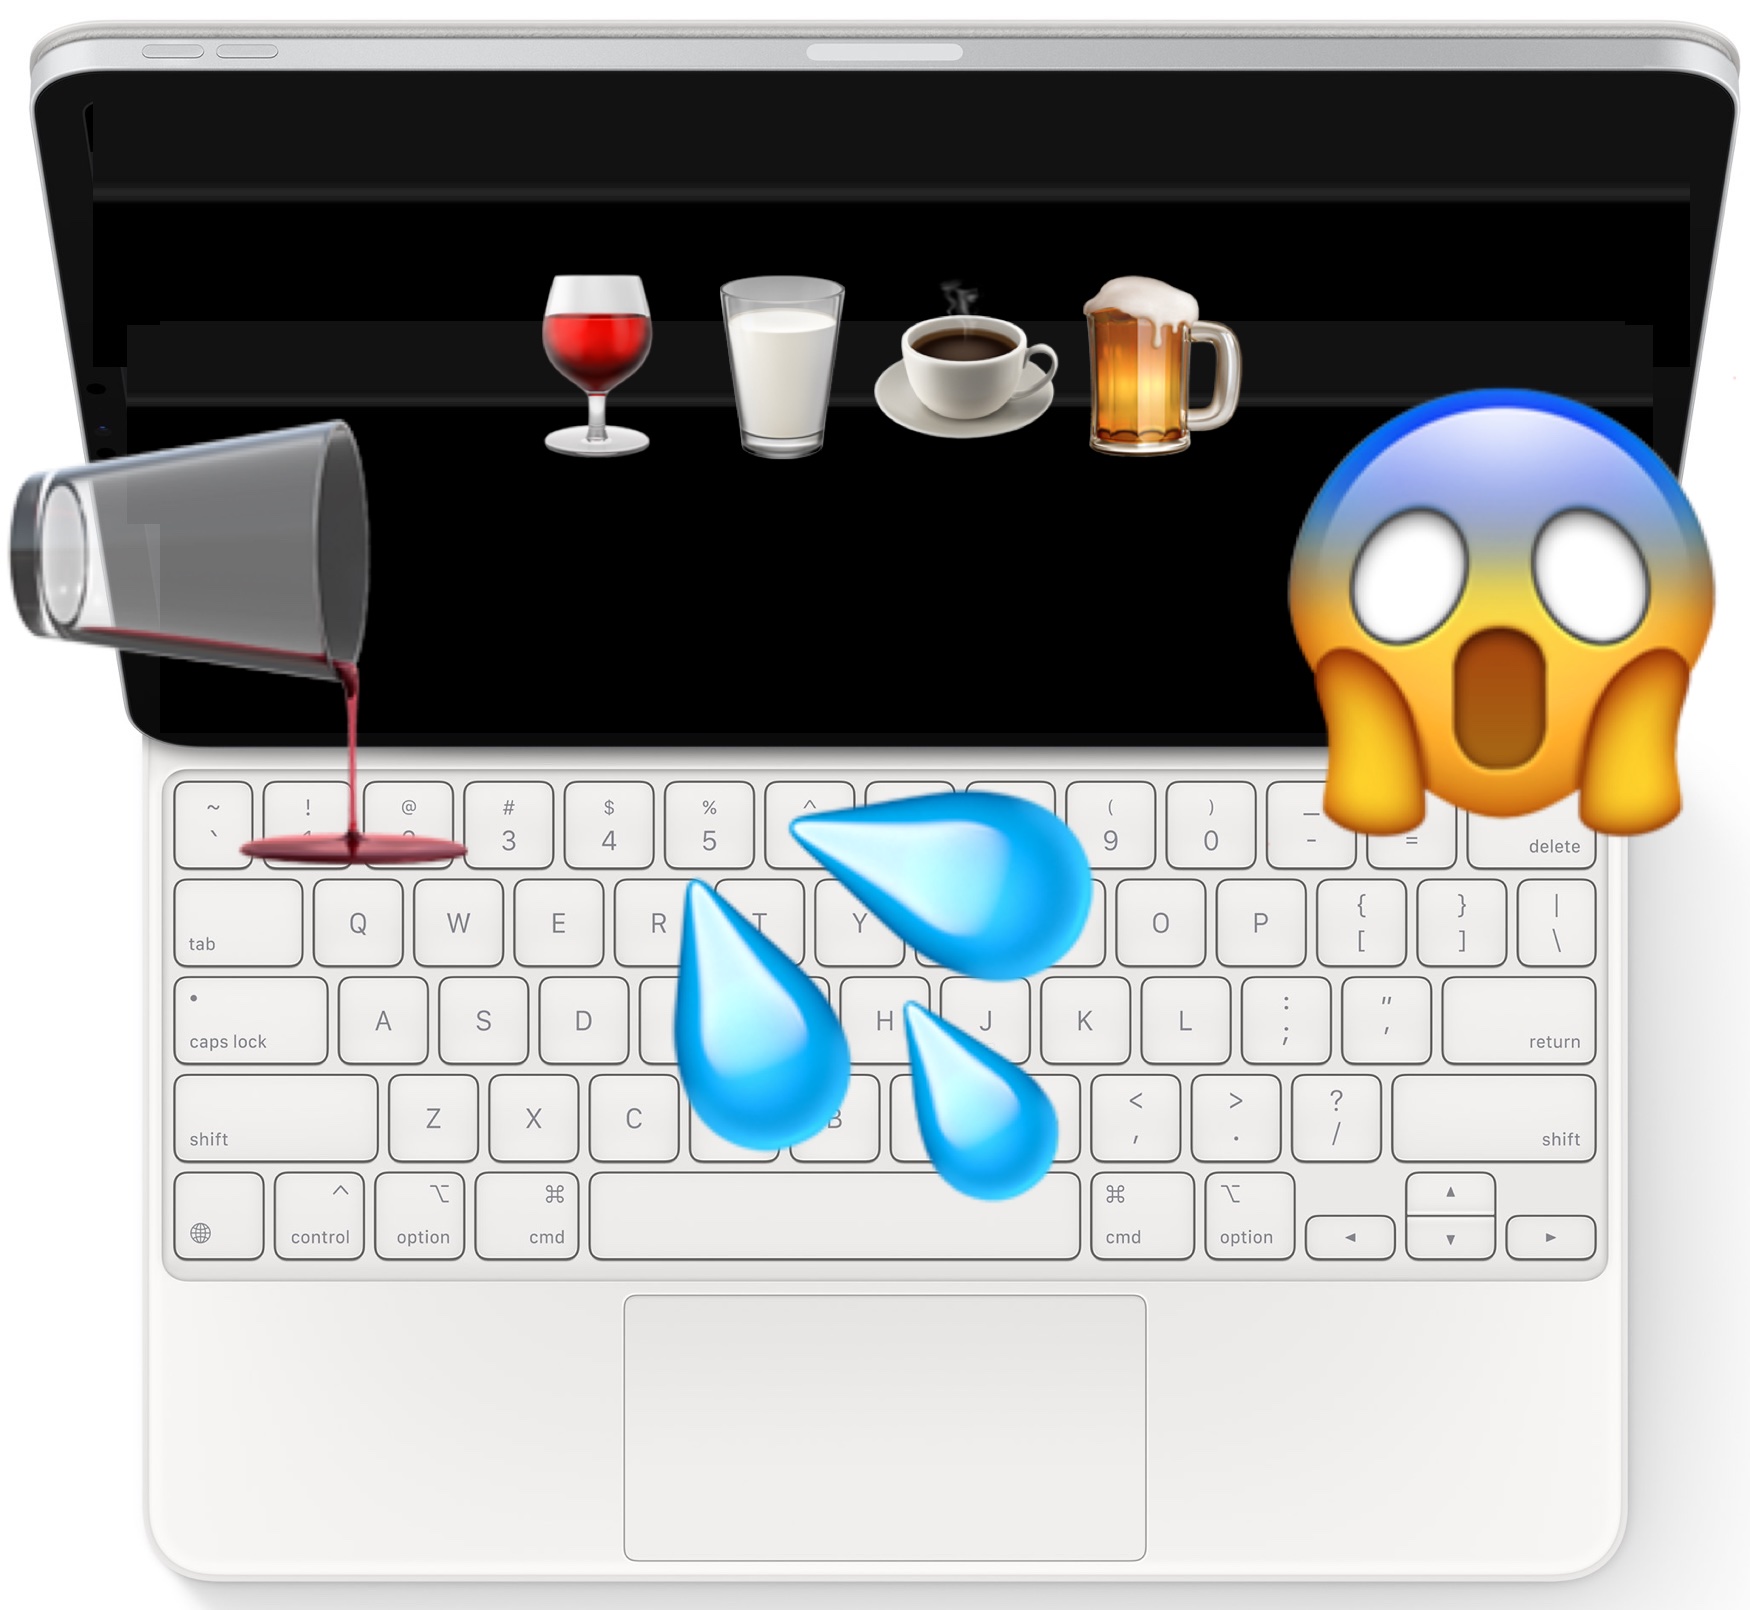 Spilled Coffee/Liquid on iPad Magic Keyboard? Here’s What To Do